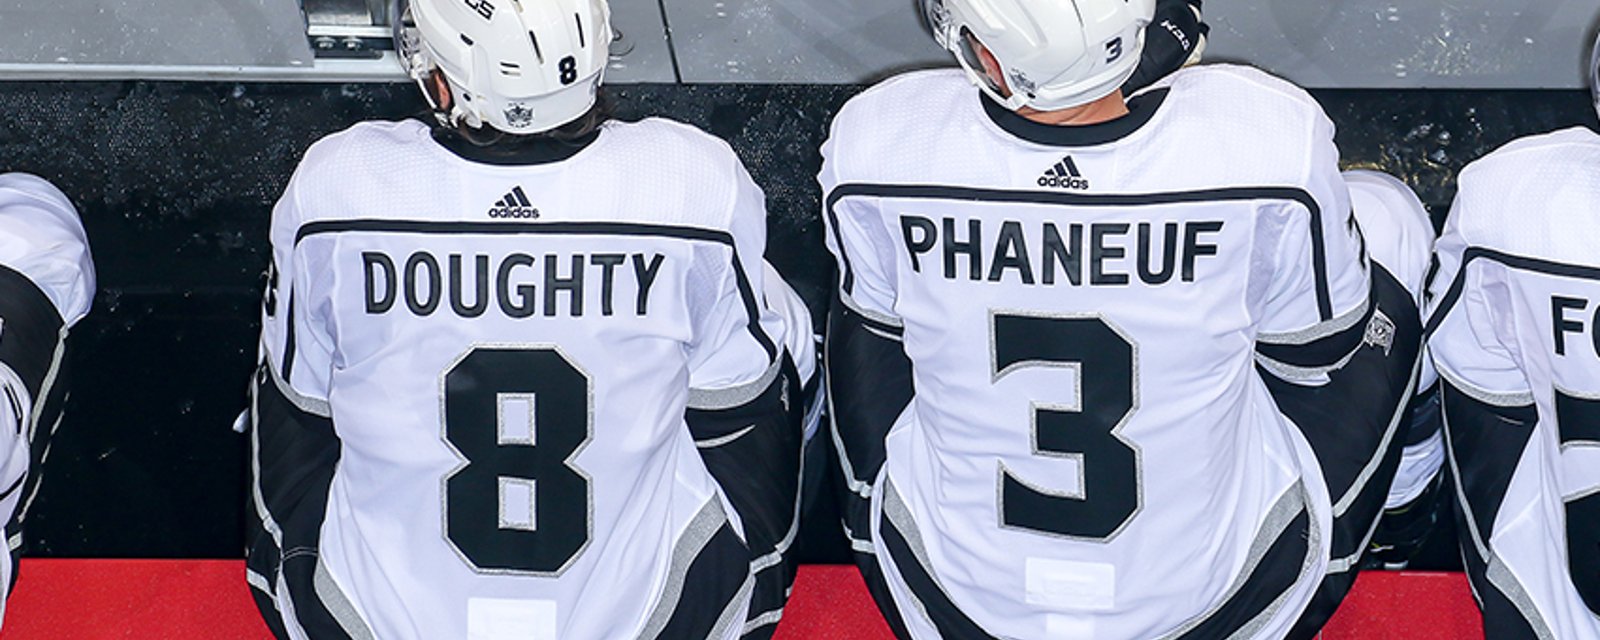 Breaking: Kings' Doughty and Phaneuf mysteriously leave the game against the Sabres 